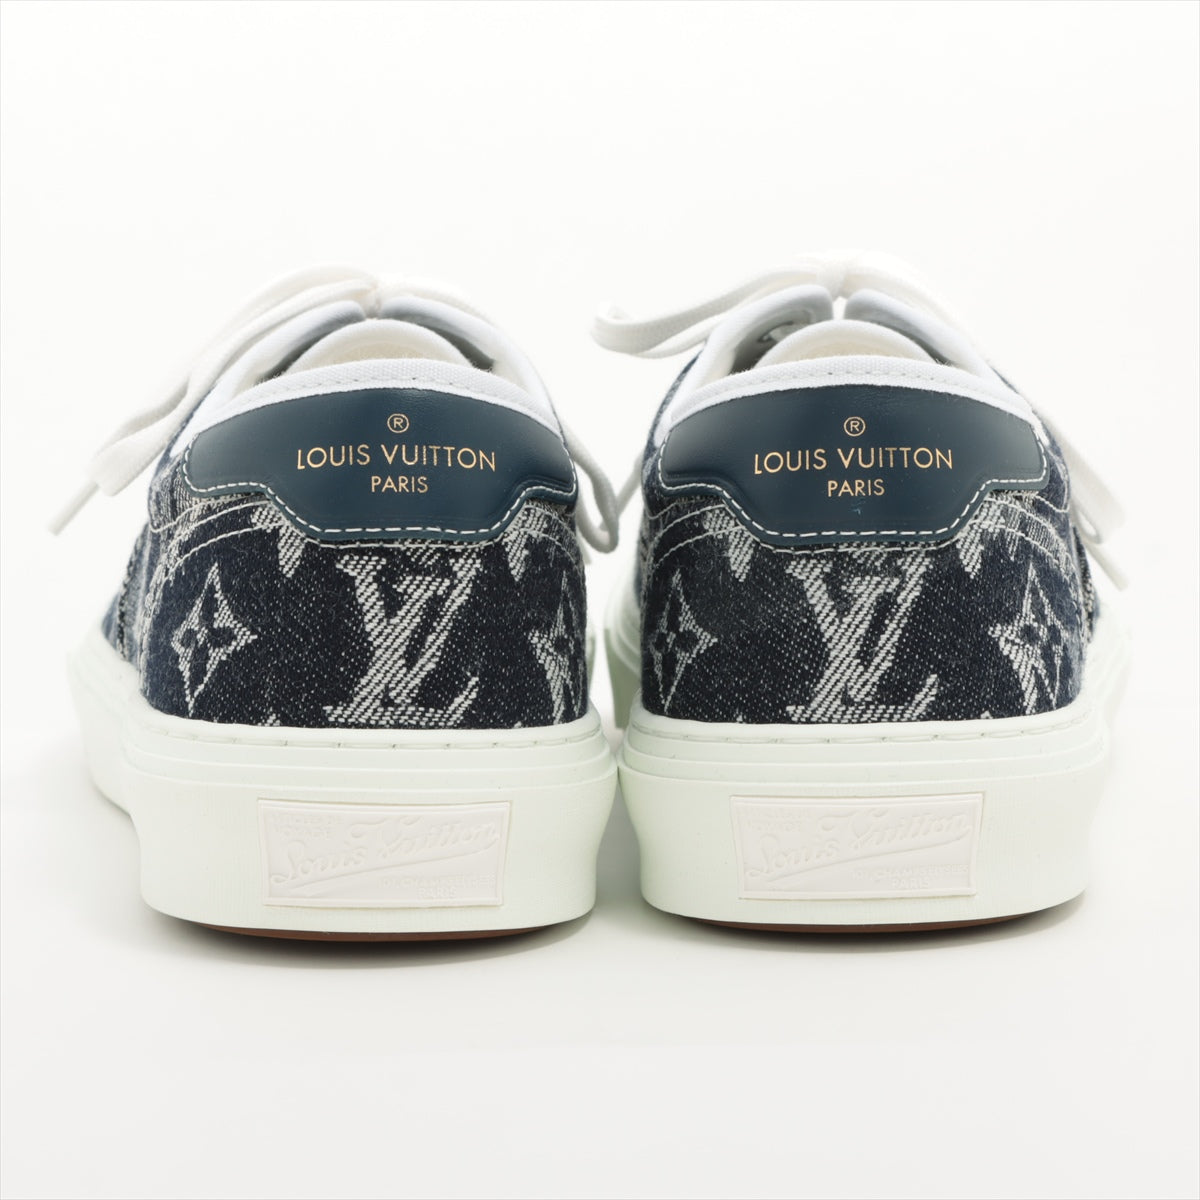 Louis Vuitton Trocadero line 20 years Canvas & leather Sneakers 6 Men's Navy x white LD1200 Monogram Is there a replacement string